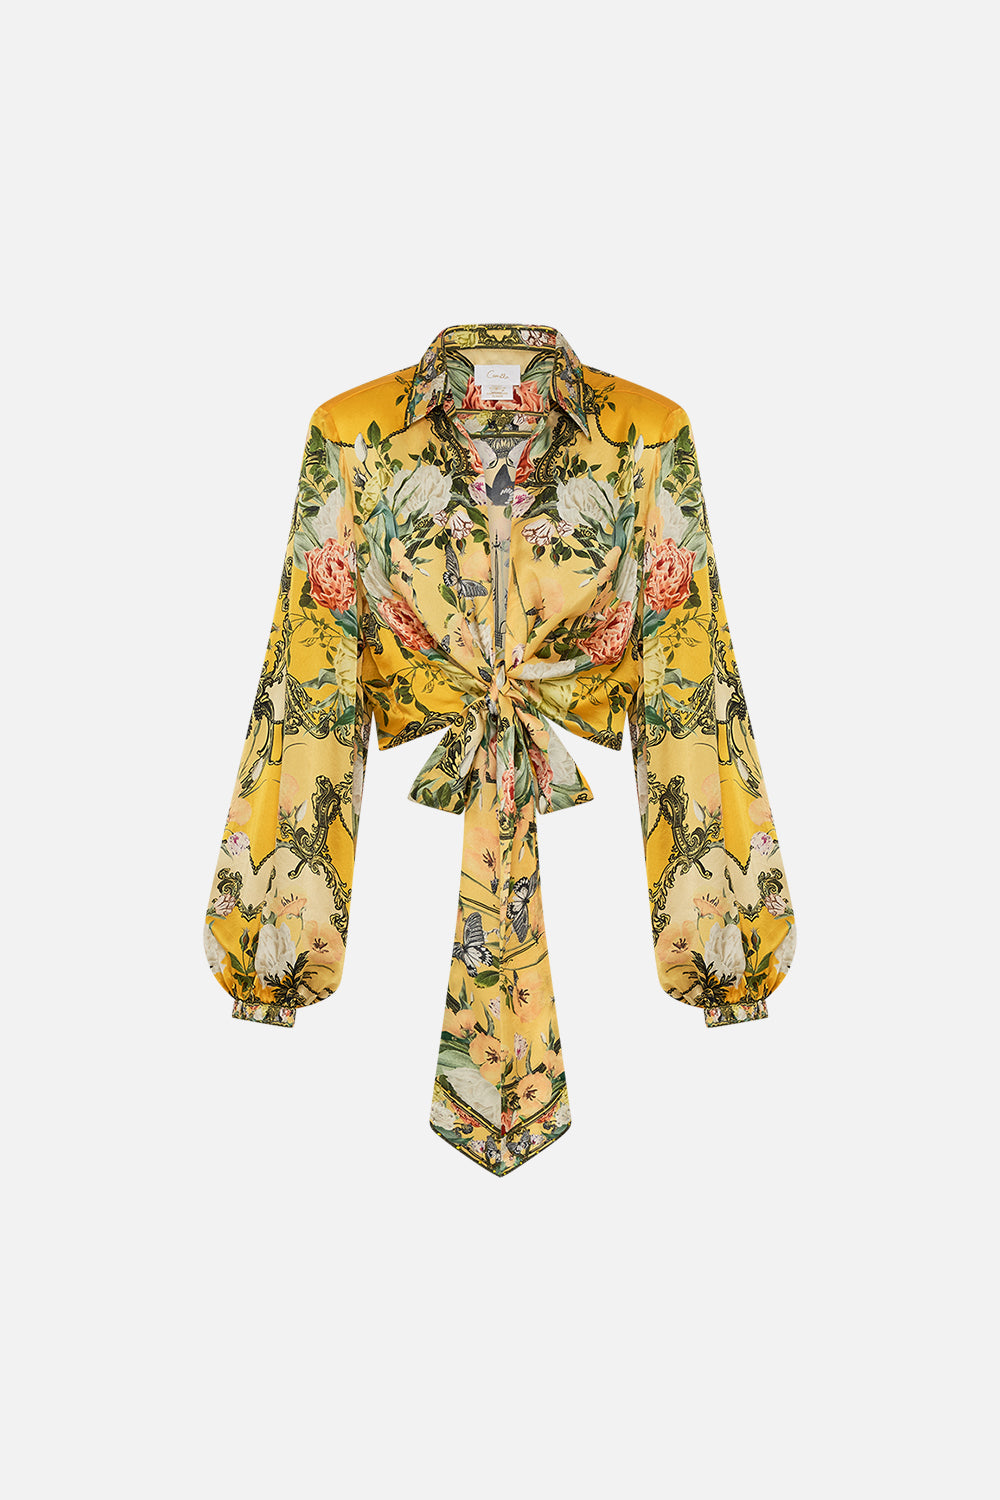 CAMILLA gold cropped wrap shirt in Paths Of Gold print.